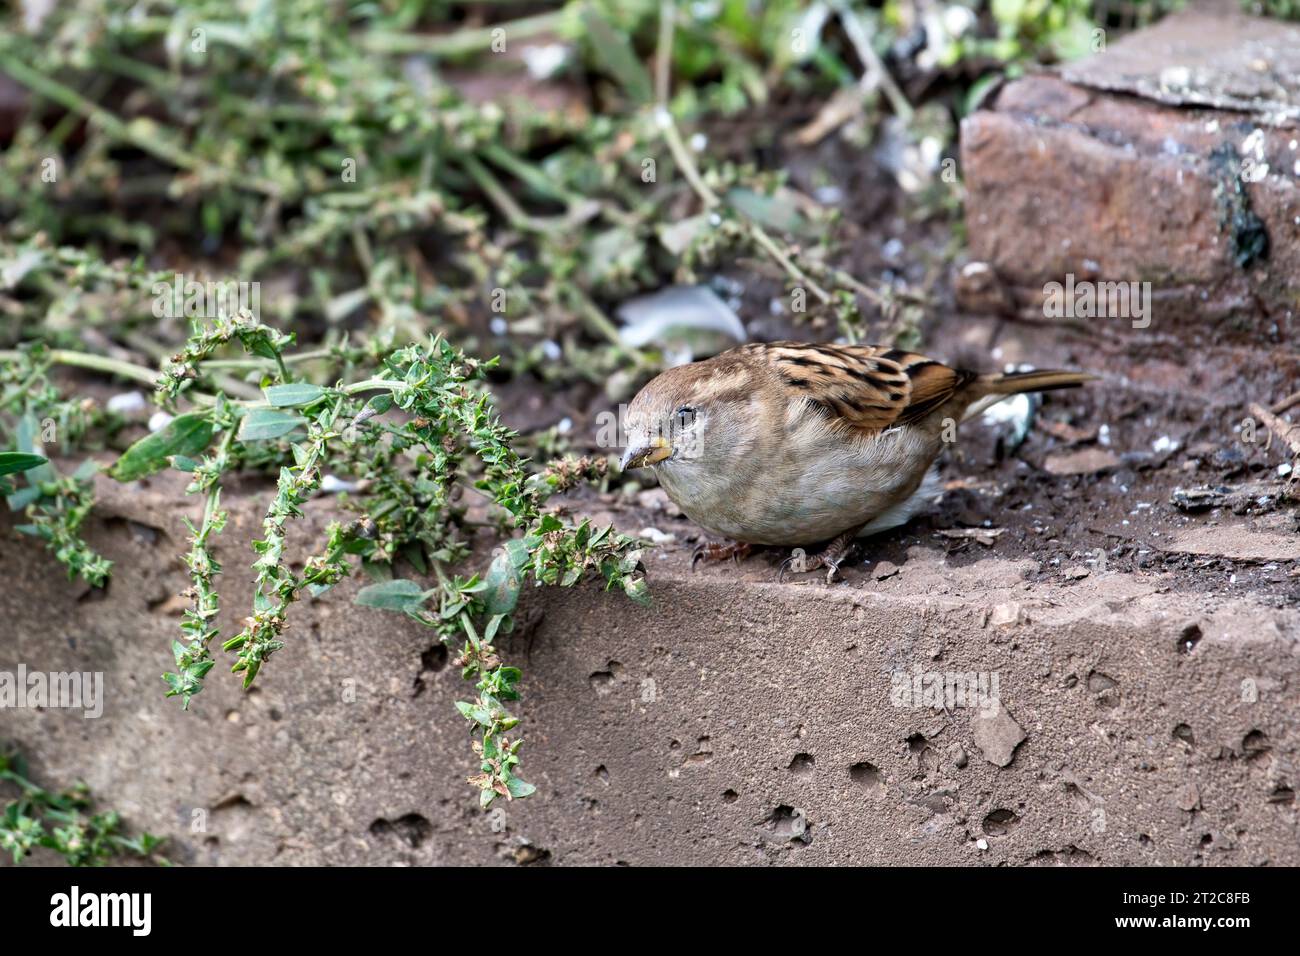 House sparrow (Passer domesticus) female feeding on seeds of a weed growing on urban waste ground Stock Photo